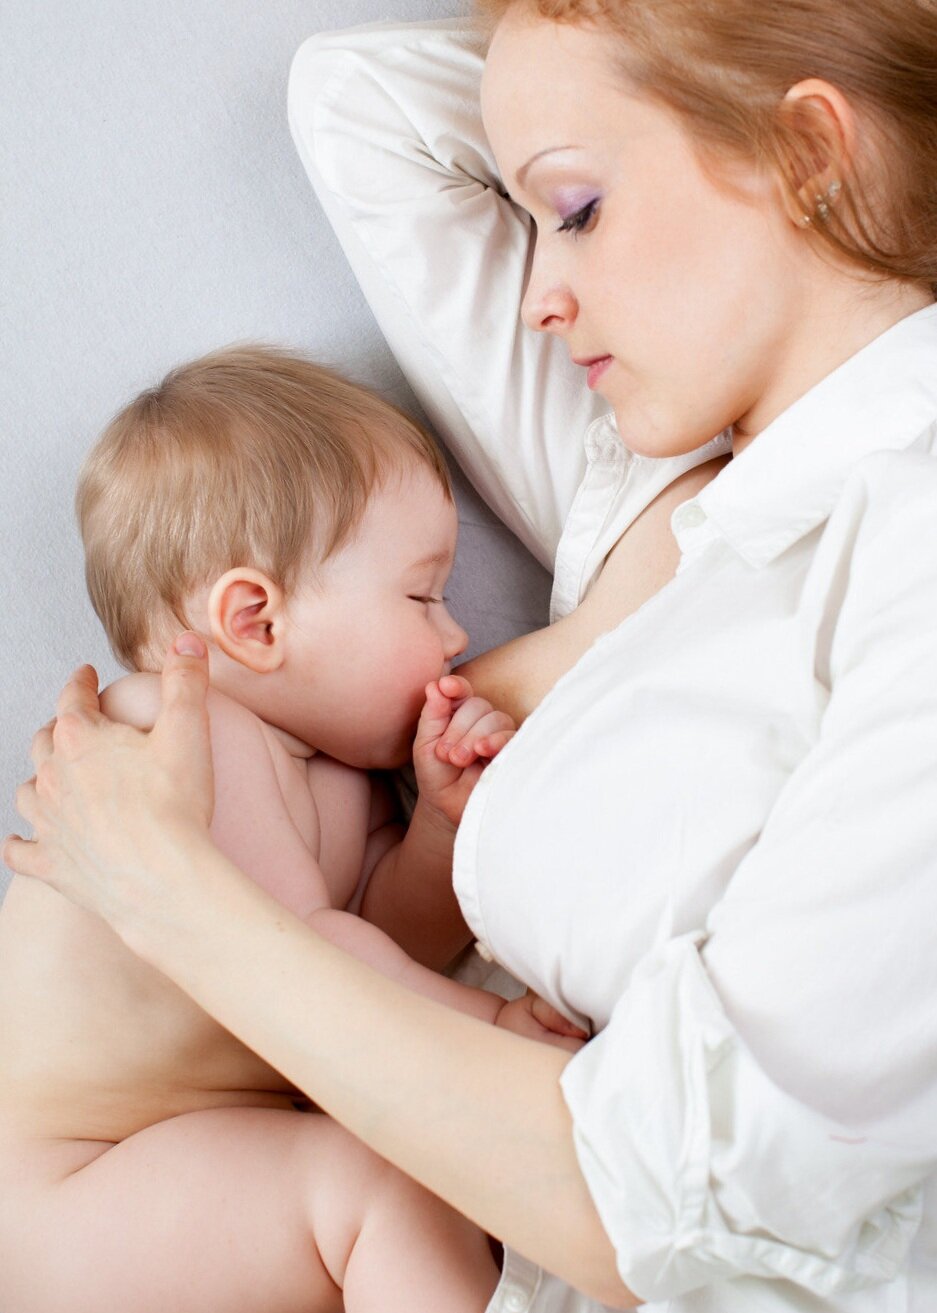 Canva+-+Mother+Breastfeeding+Baby+at+Home+%281%29.jpg